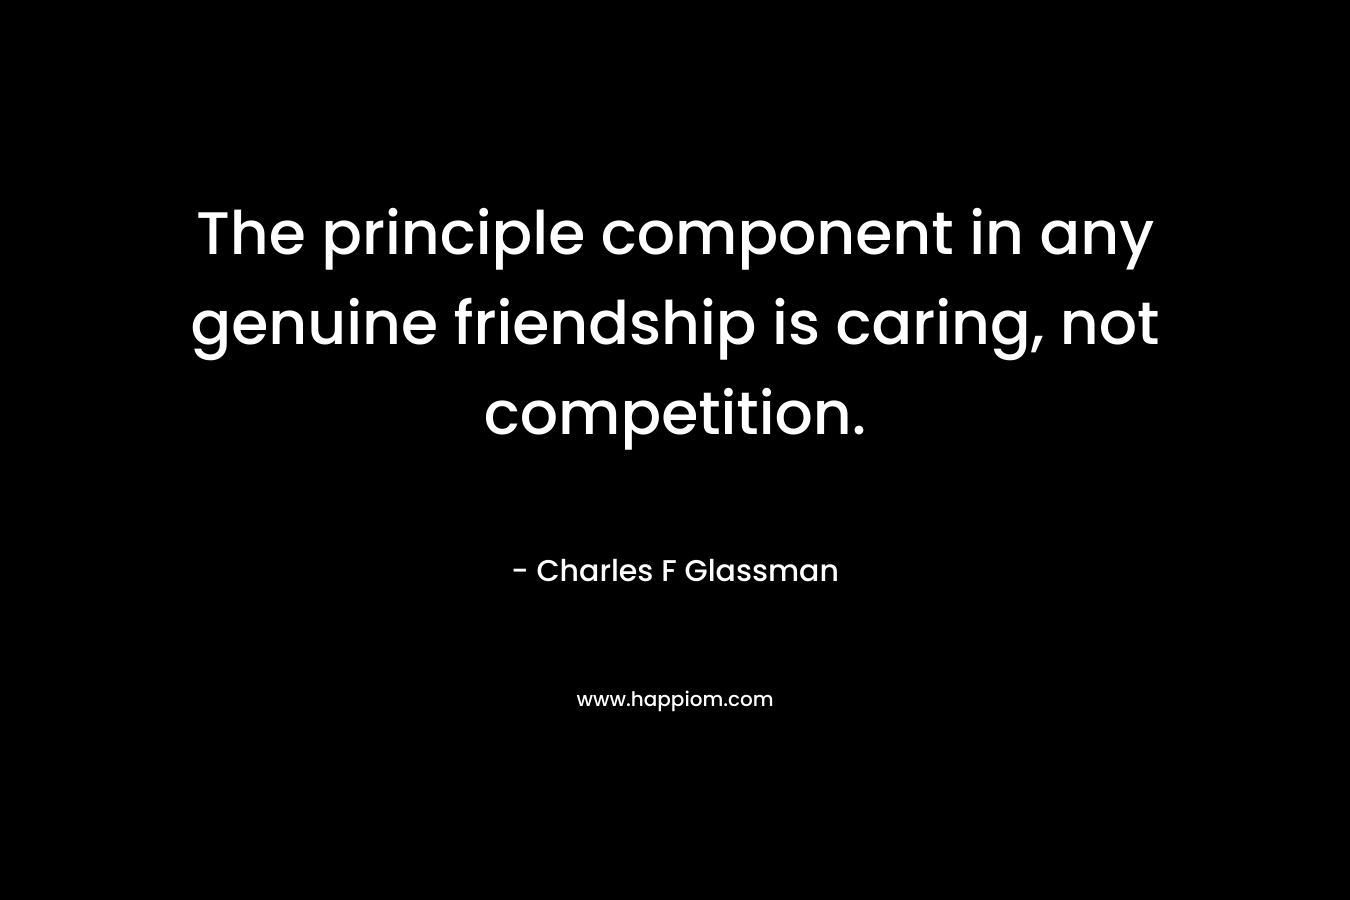 The principle component in any genuine friendship is caring, not competition. – Charles F Glassman